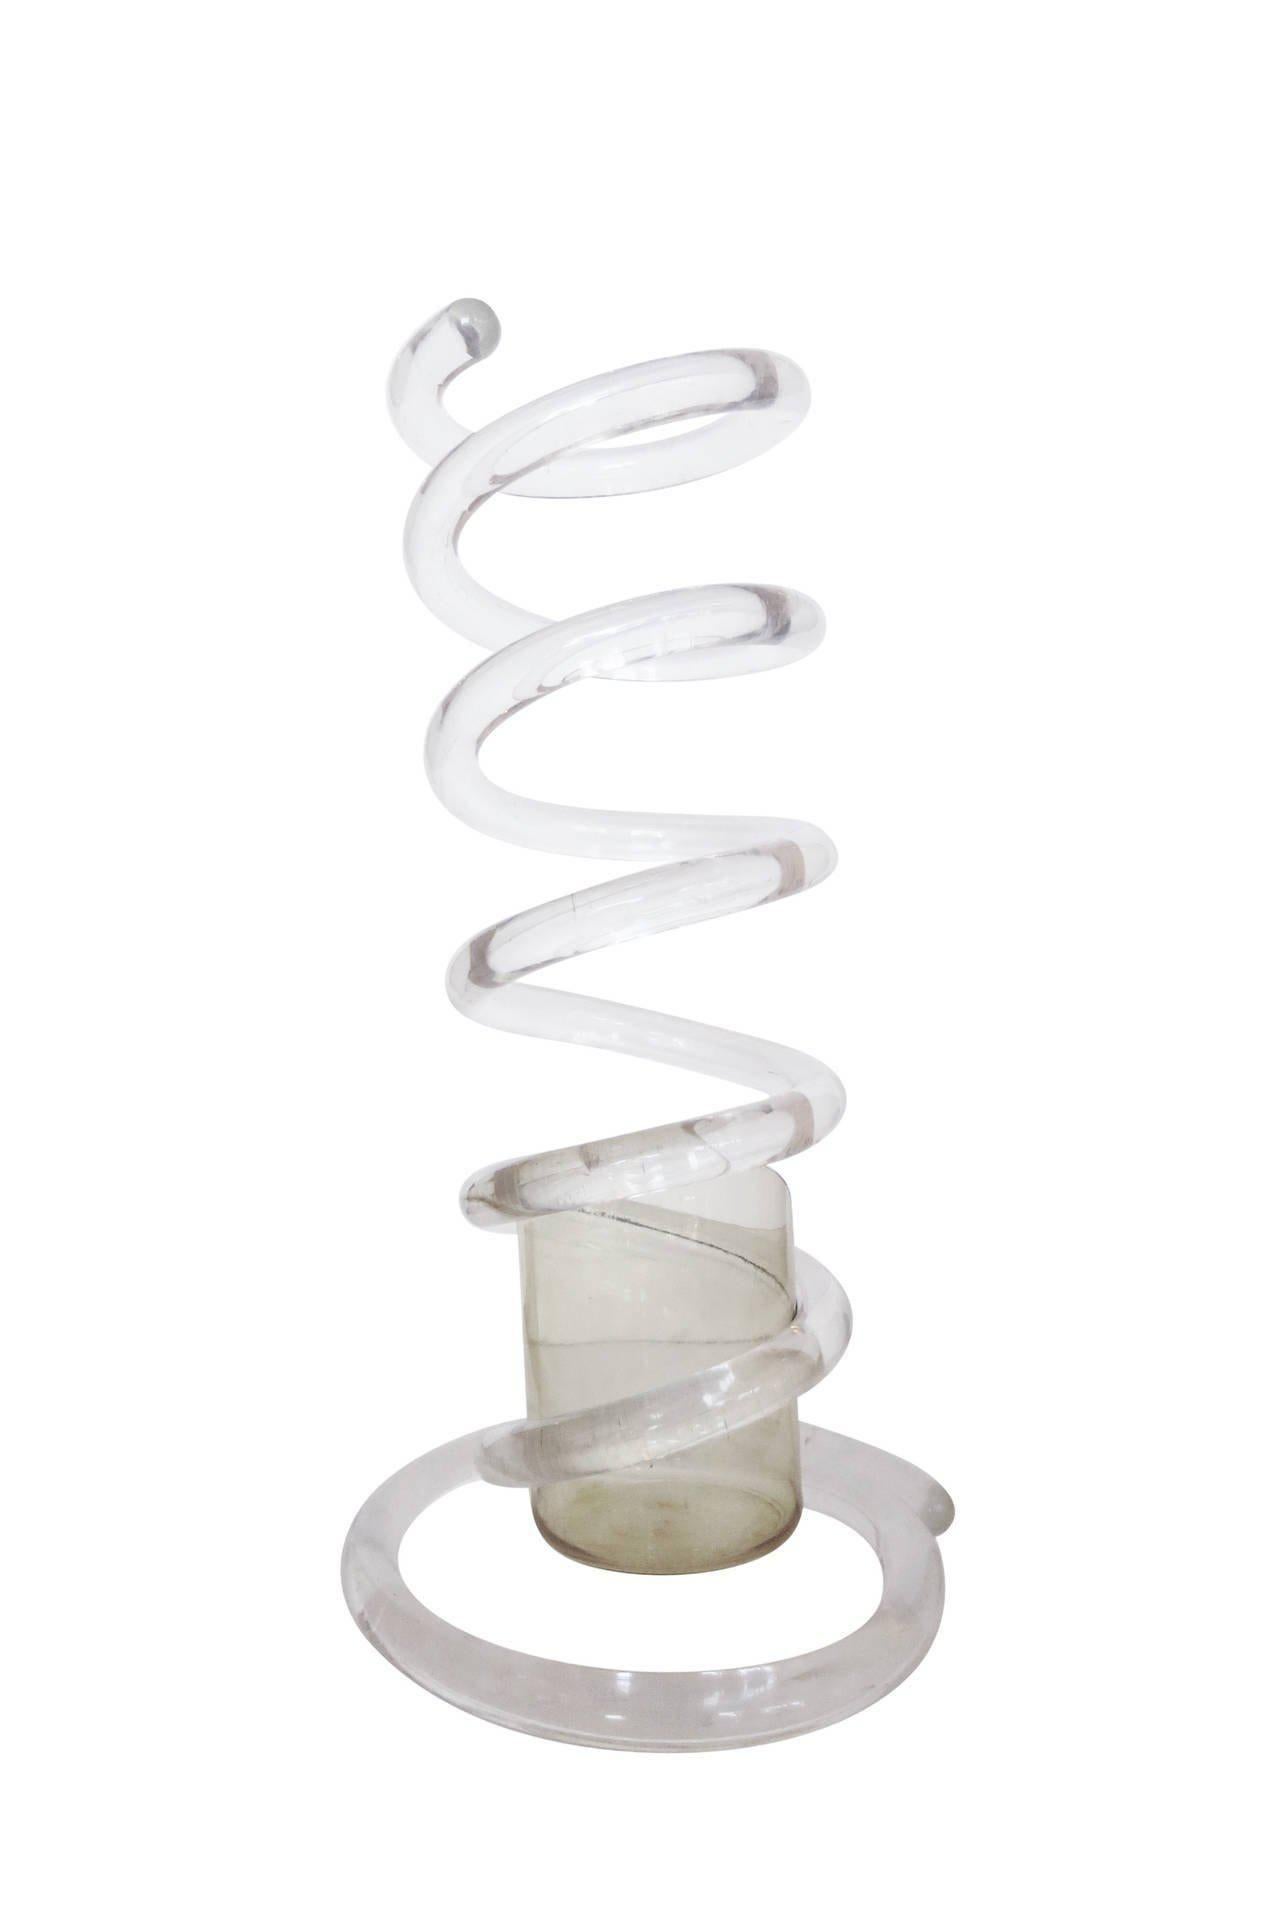 American 1950s Dorothy Thorpe Lucite Spiral Spring Umbrella Stand For Sale